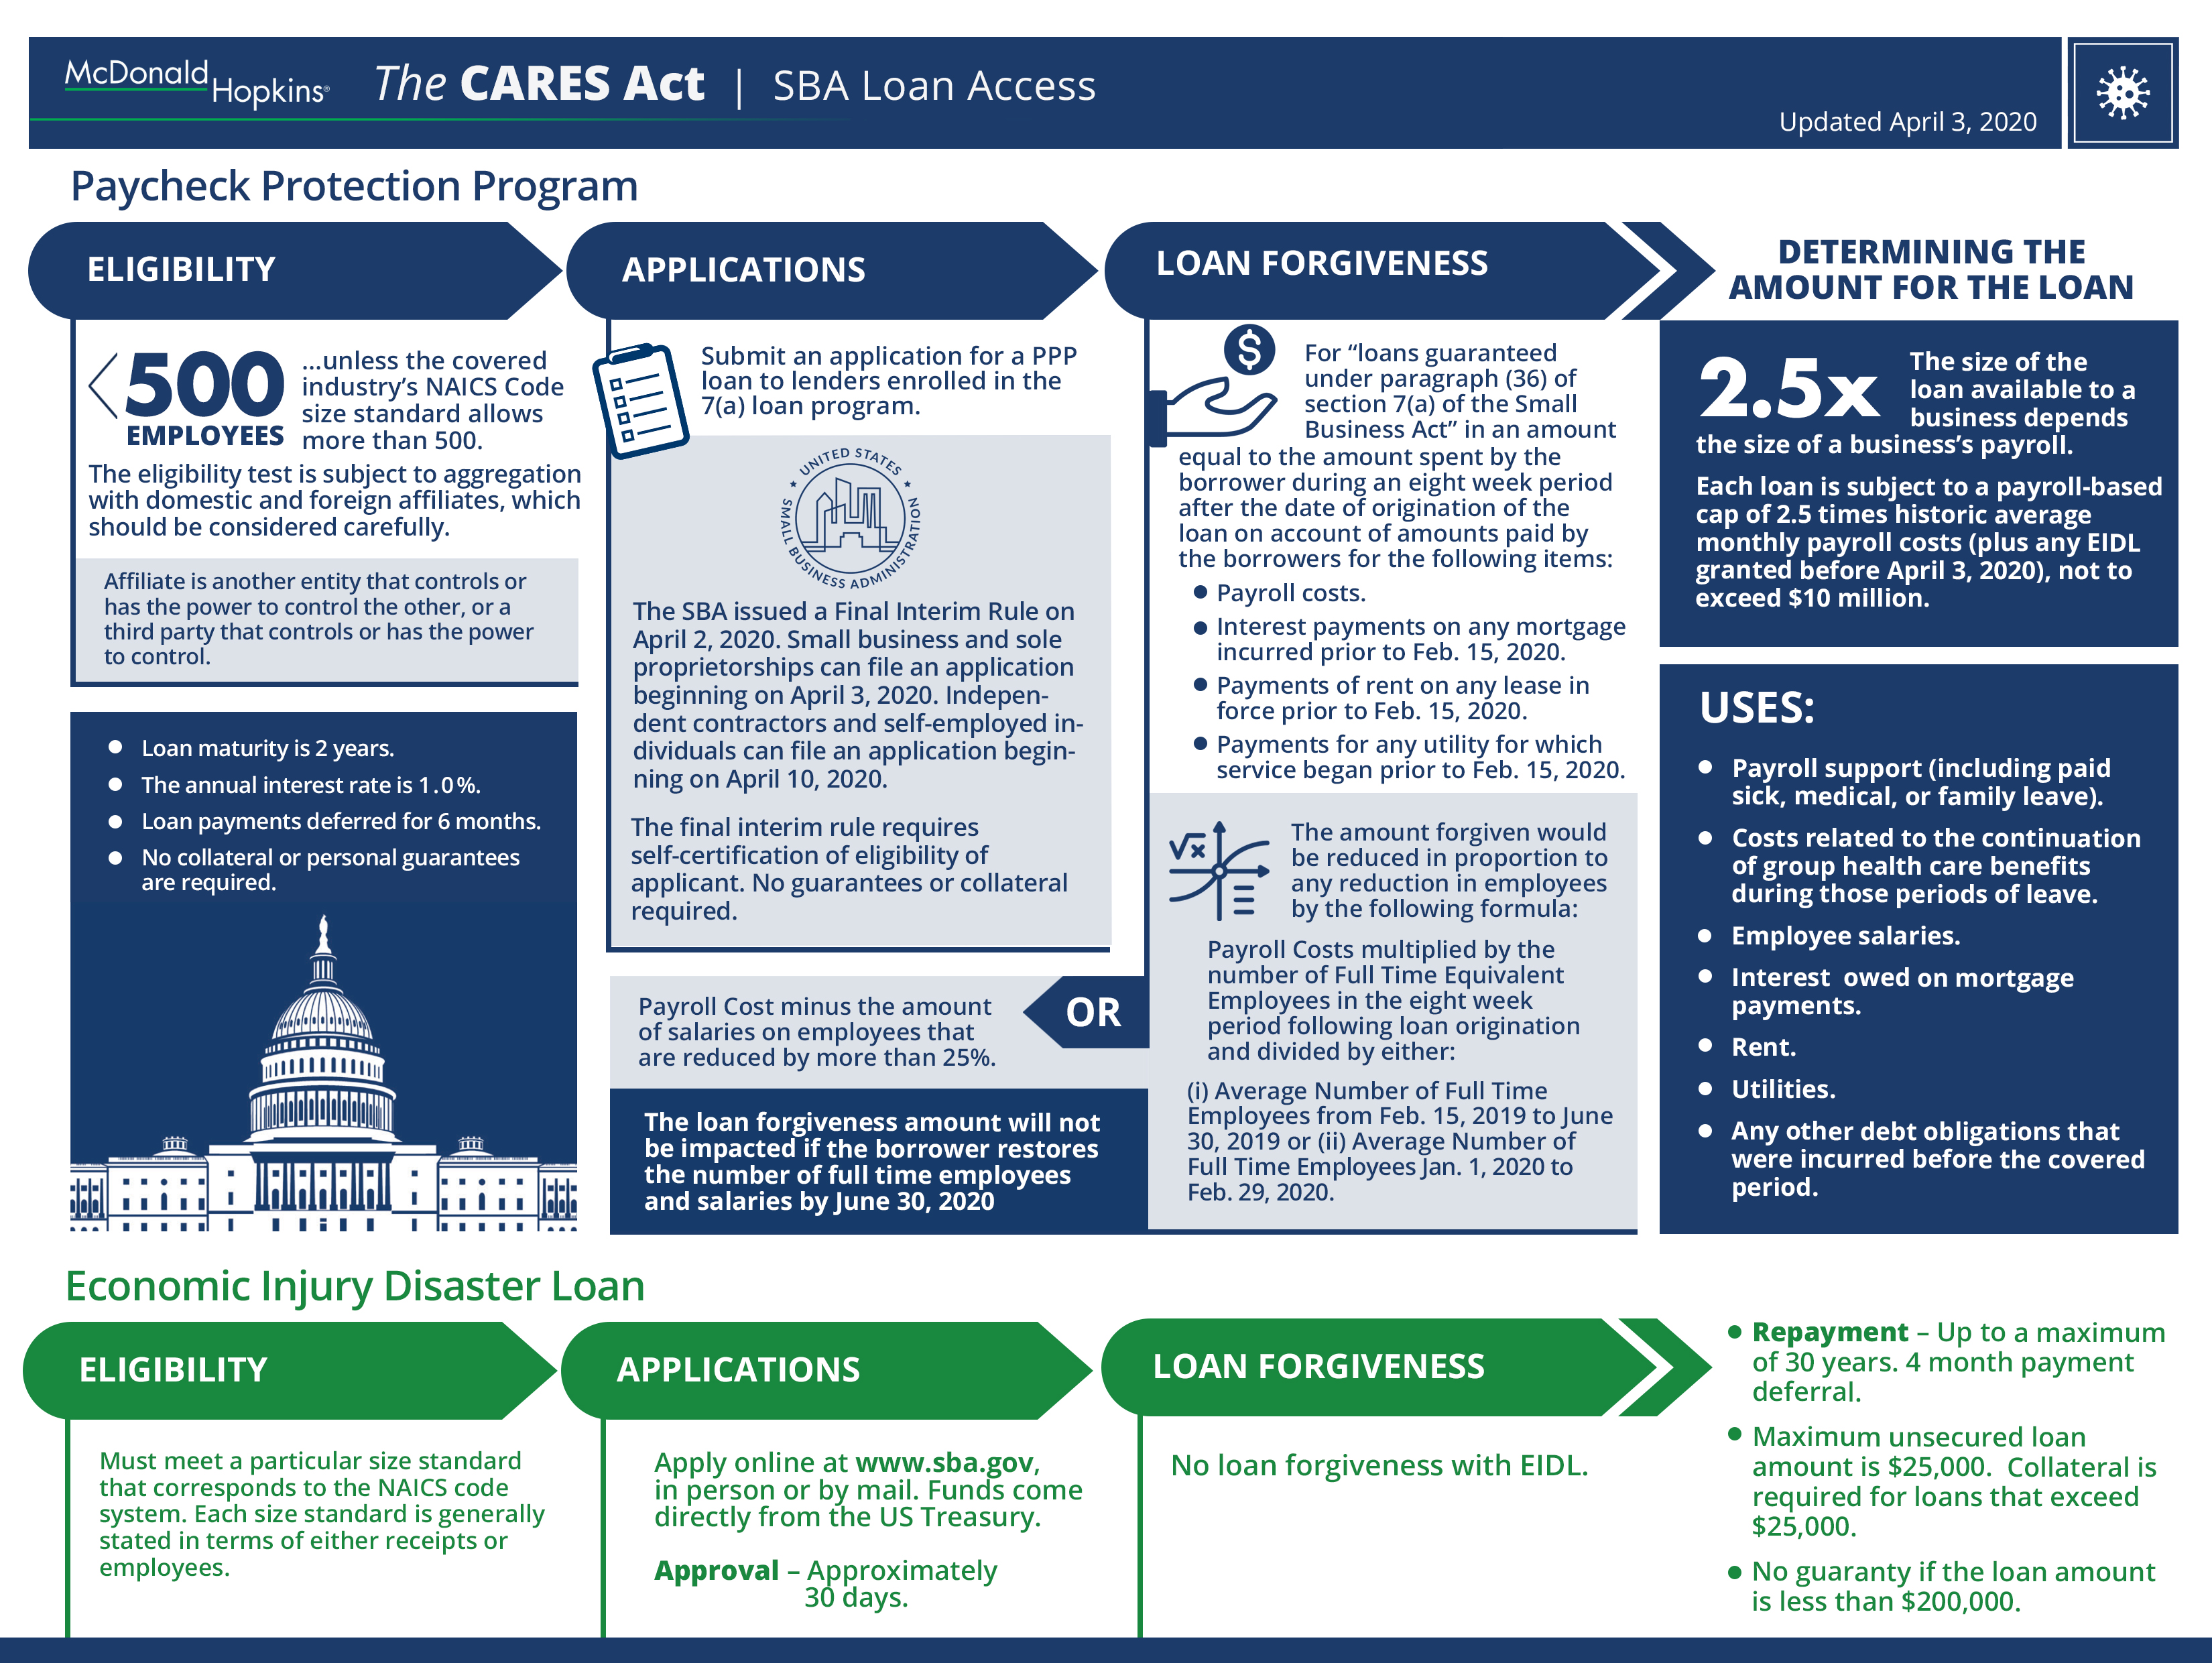 CARES-Act-infographic-version-E-4-6-20.jpg